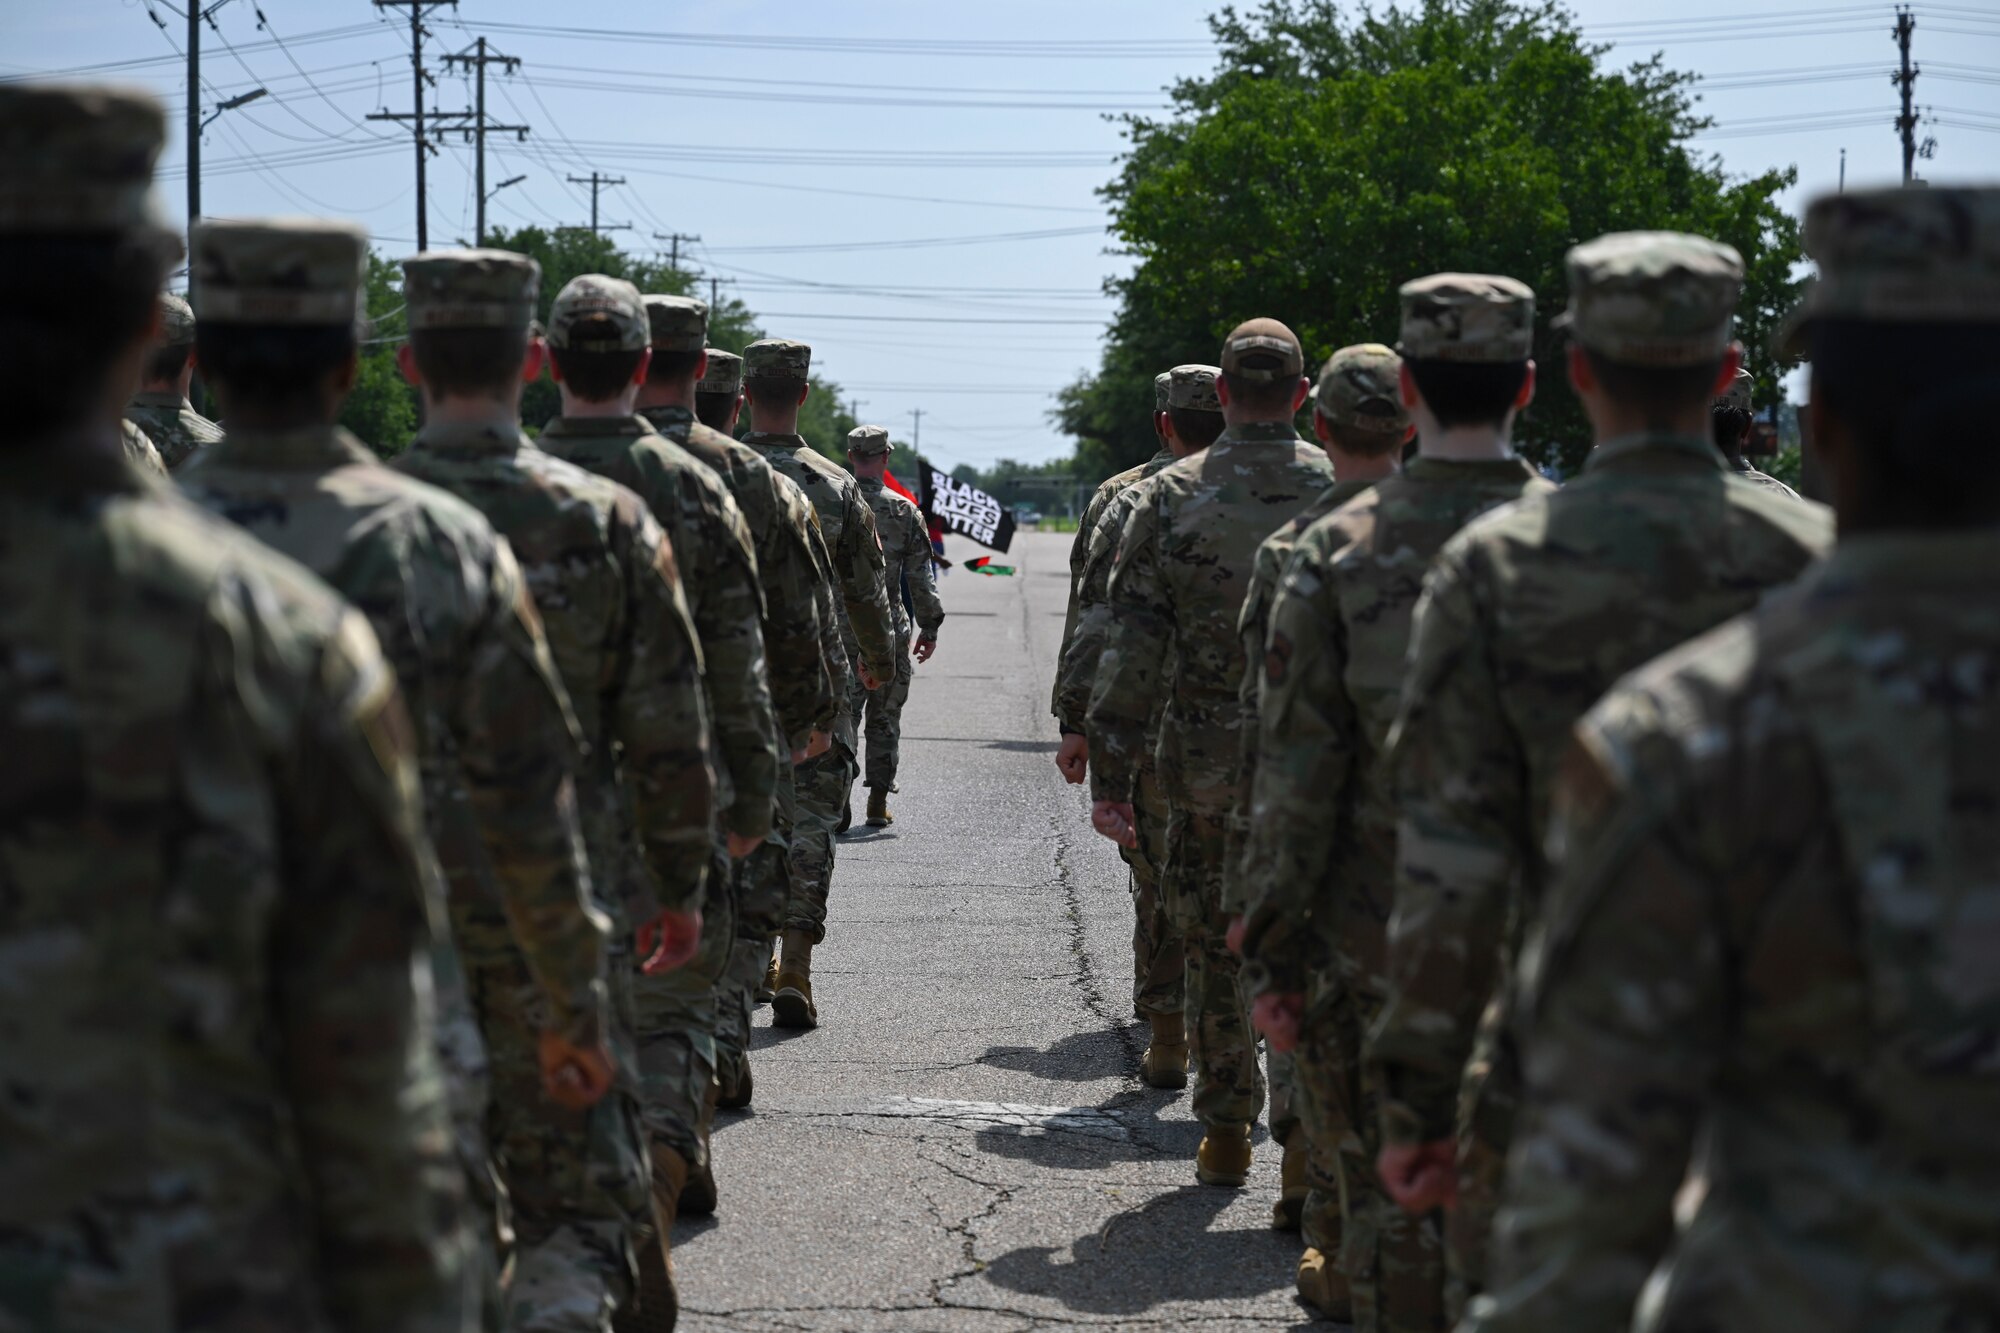 U.S. Air Force service members assigned to Columbus Air Force Base, march in the 25th Annual Juneteenth Parade Festival, June 18, 2022. This is the first year the base has participated with the community at the parade. (U.S. Air Force photo by Senior Airman Jessica Haynie)